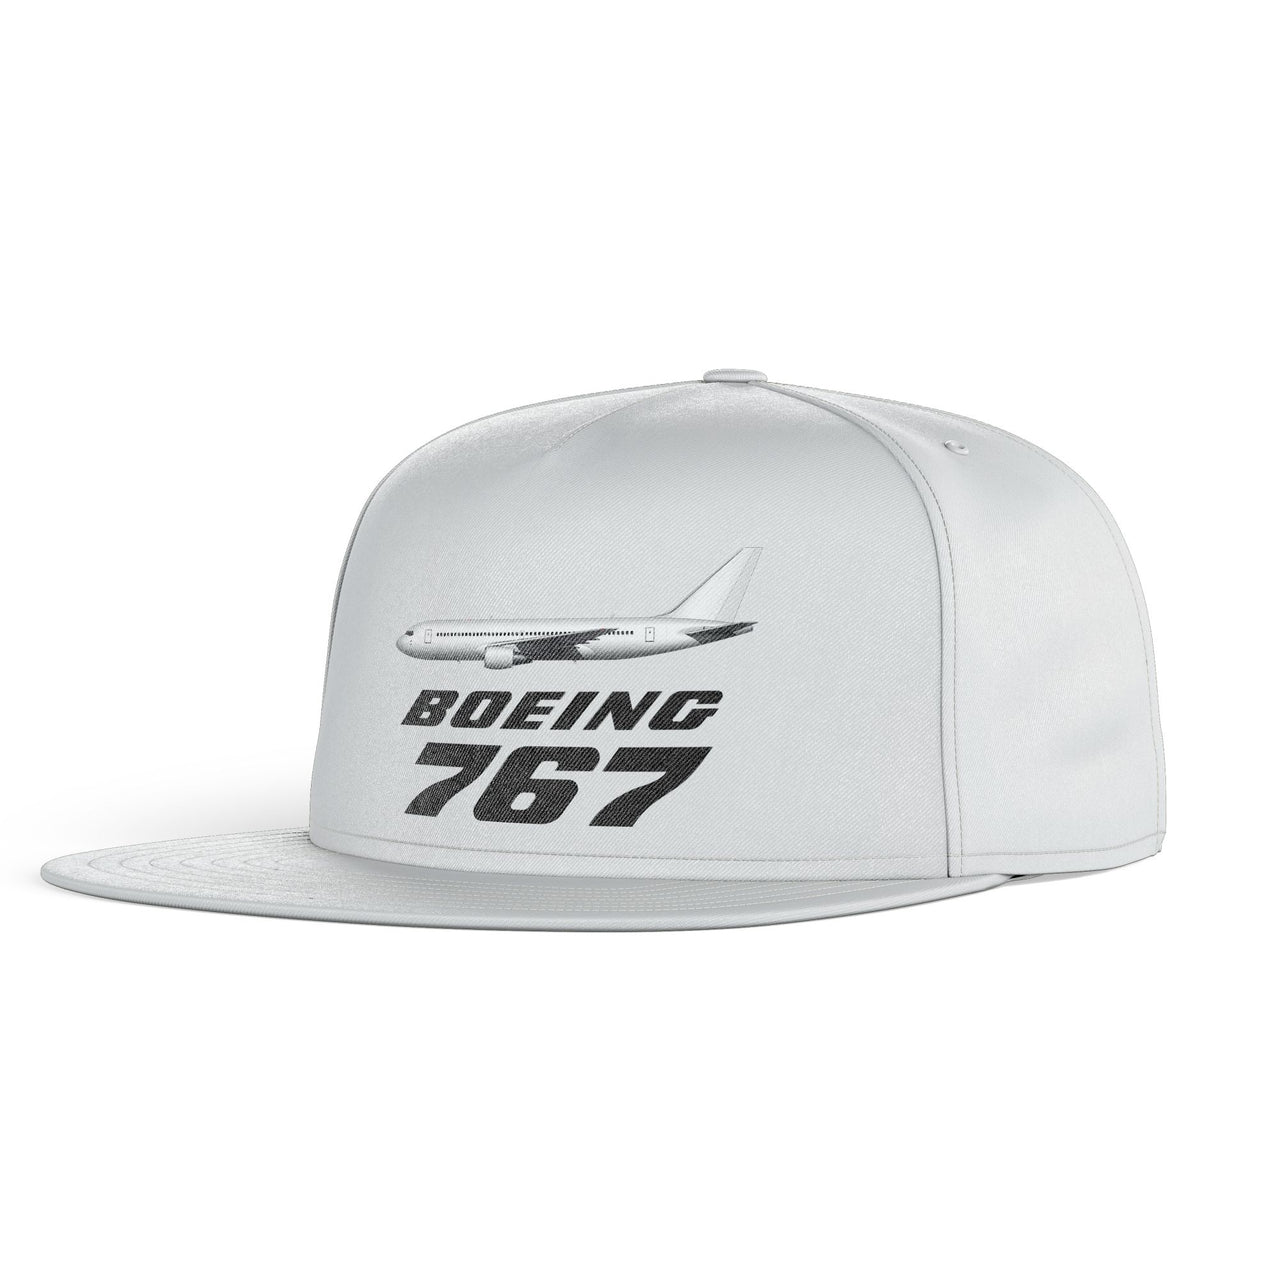 The Boeing 767 Designed Snapback Caps & Hats